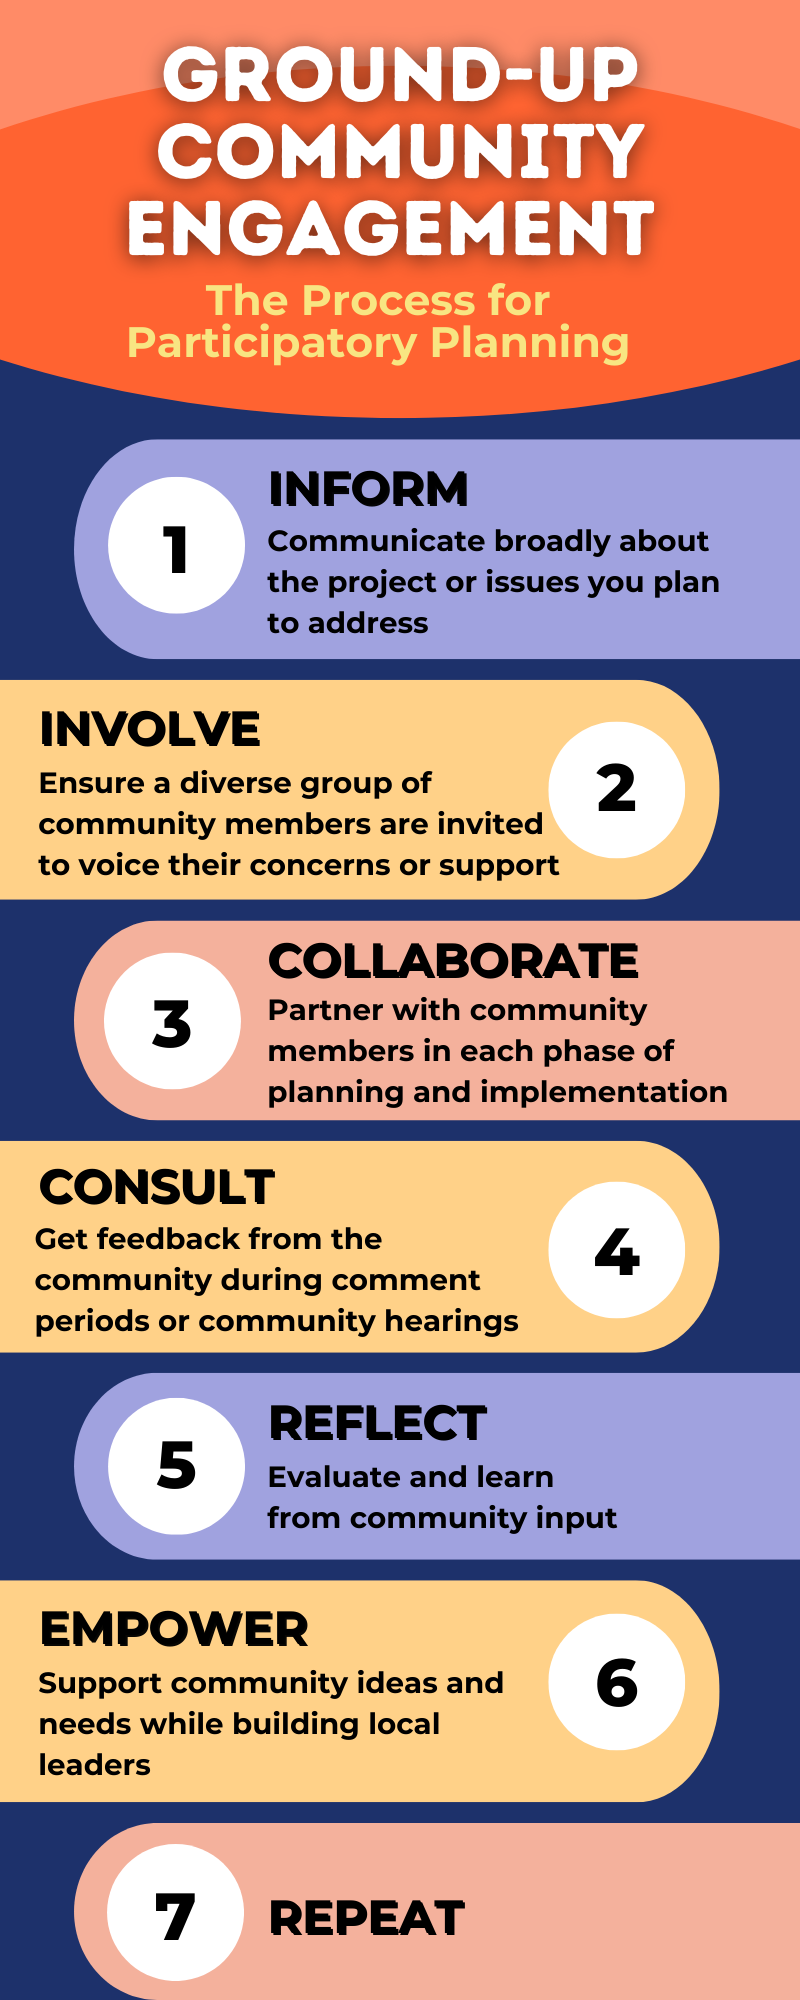 Ground-Up Community Engagement The Process for Participatory Planning. 1) 1) INFORM 2)INVOLVE 3)COLLABORATE 4)CONSULT 5)REFLECT 6)EMPOWER 7)REPEAT 